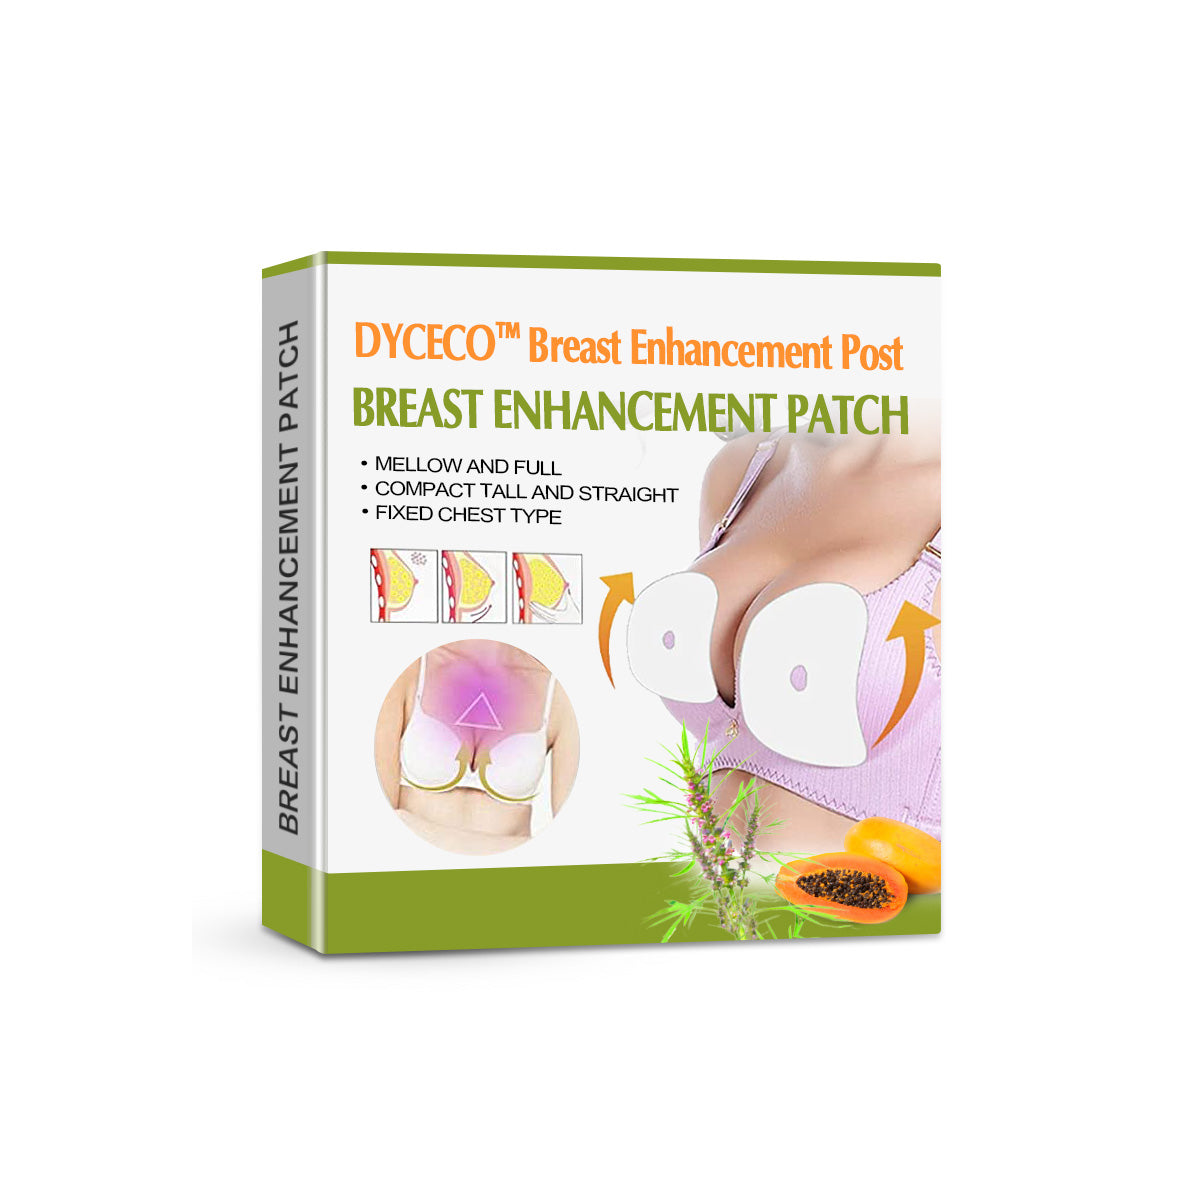 DYCECO™ Breast Enhancement Patch